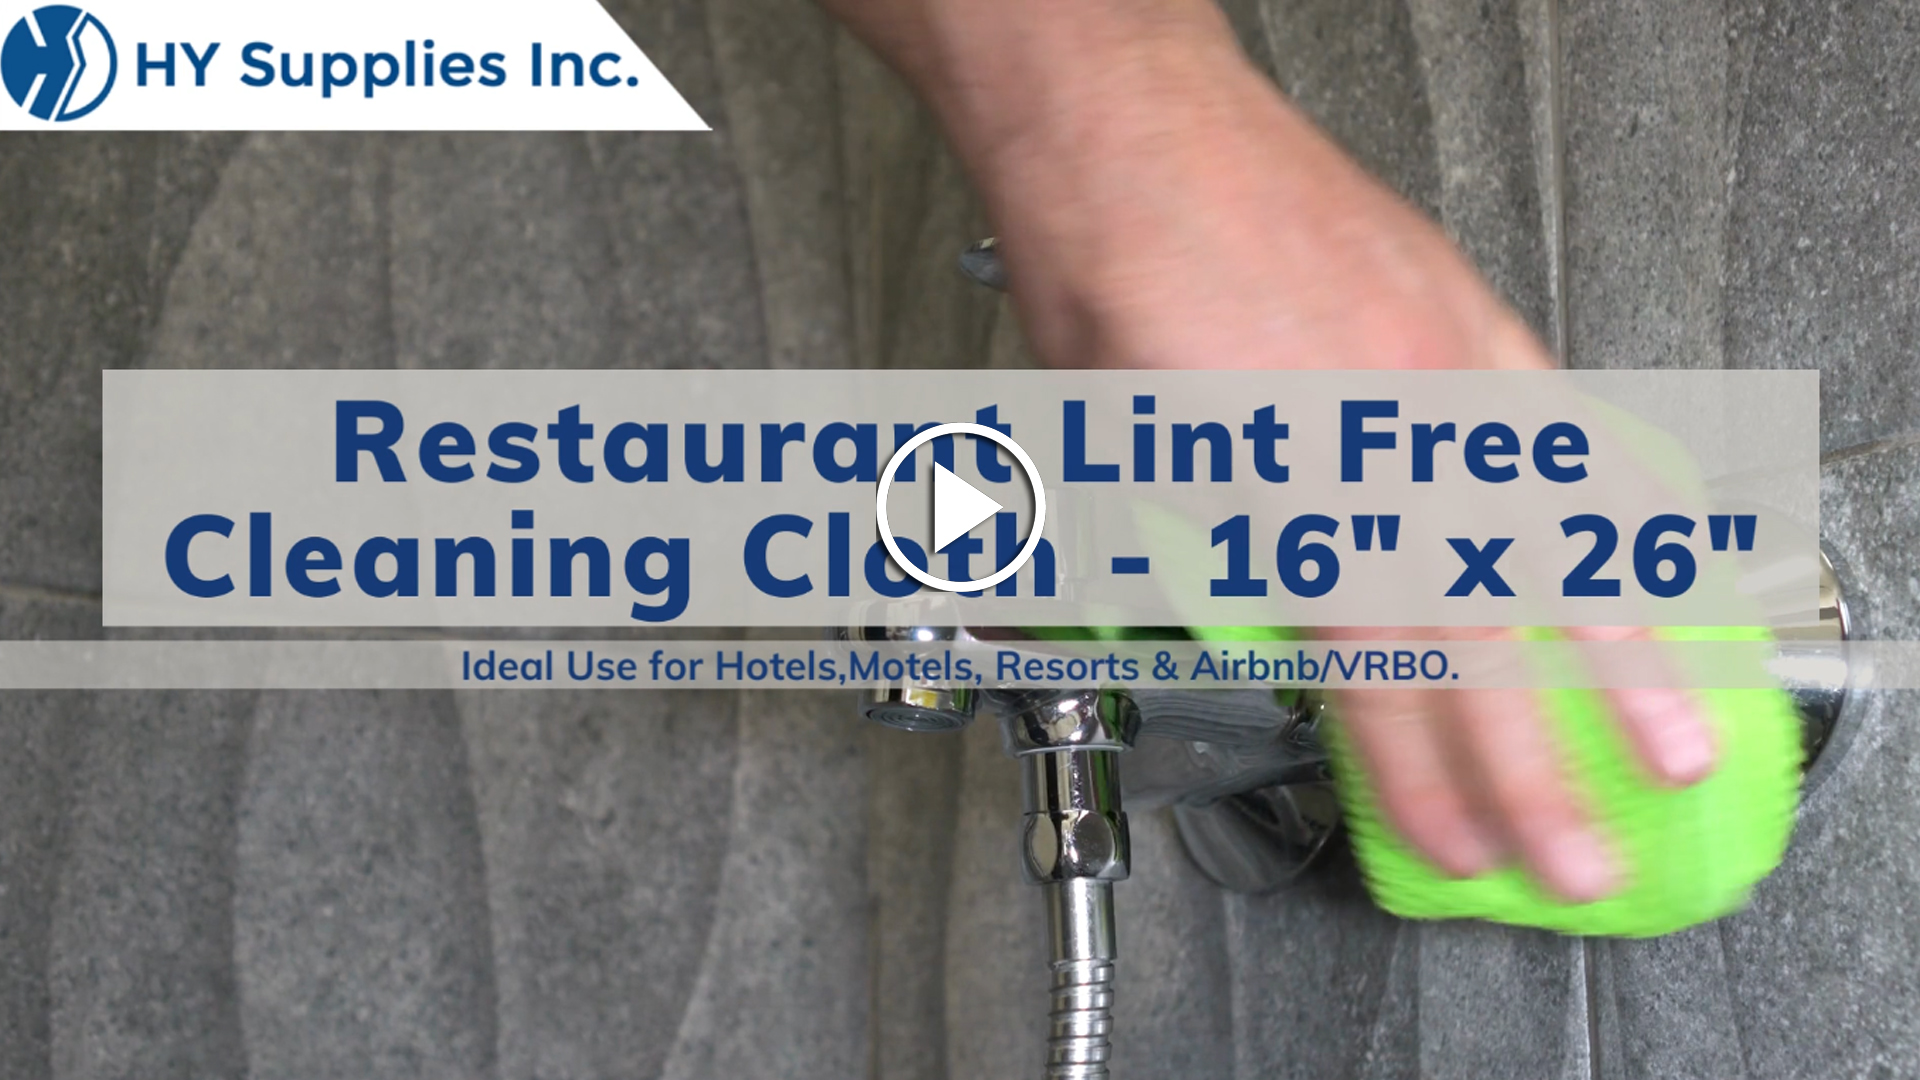 Restaurant Lint Free Cleaning Cloth - 16"x 26"